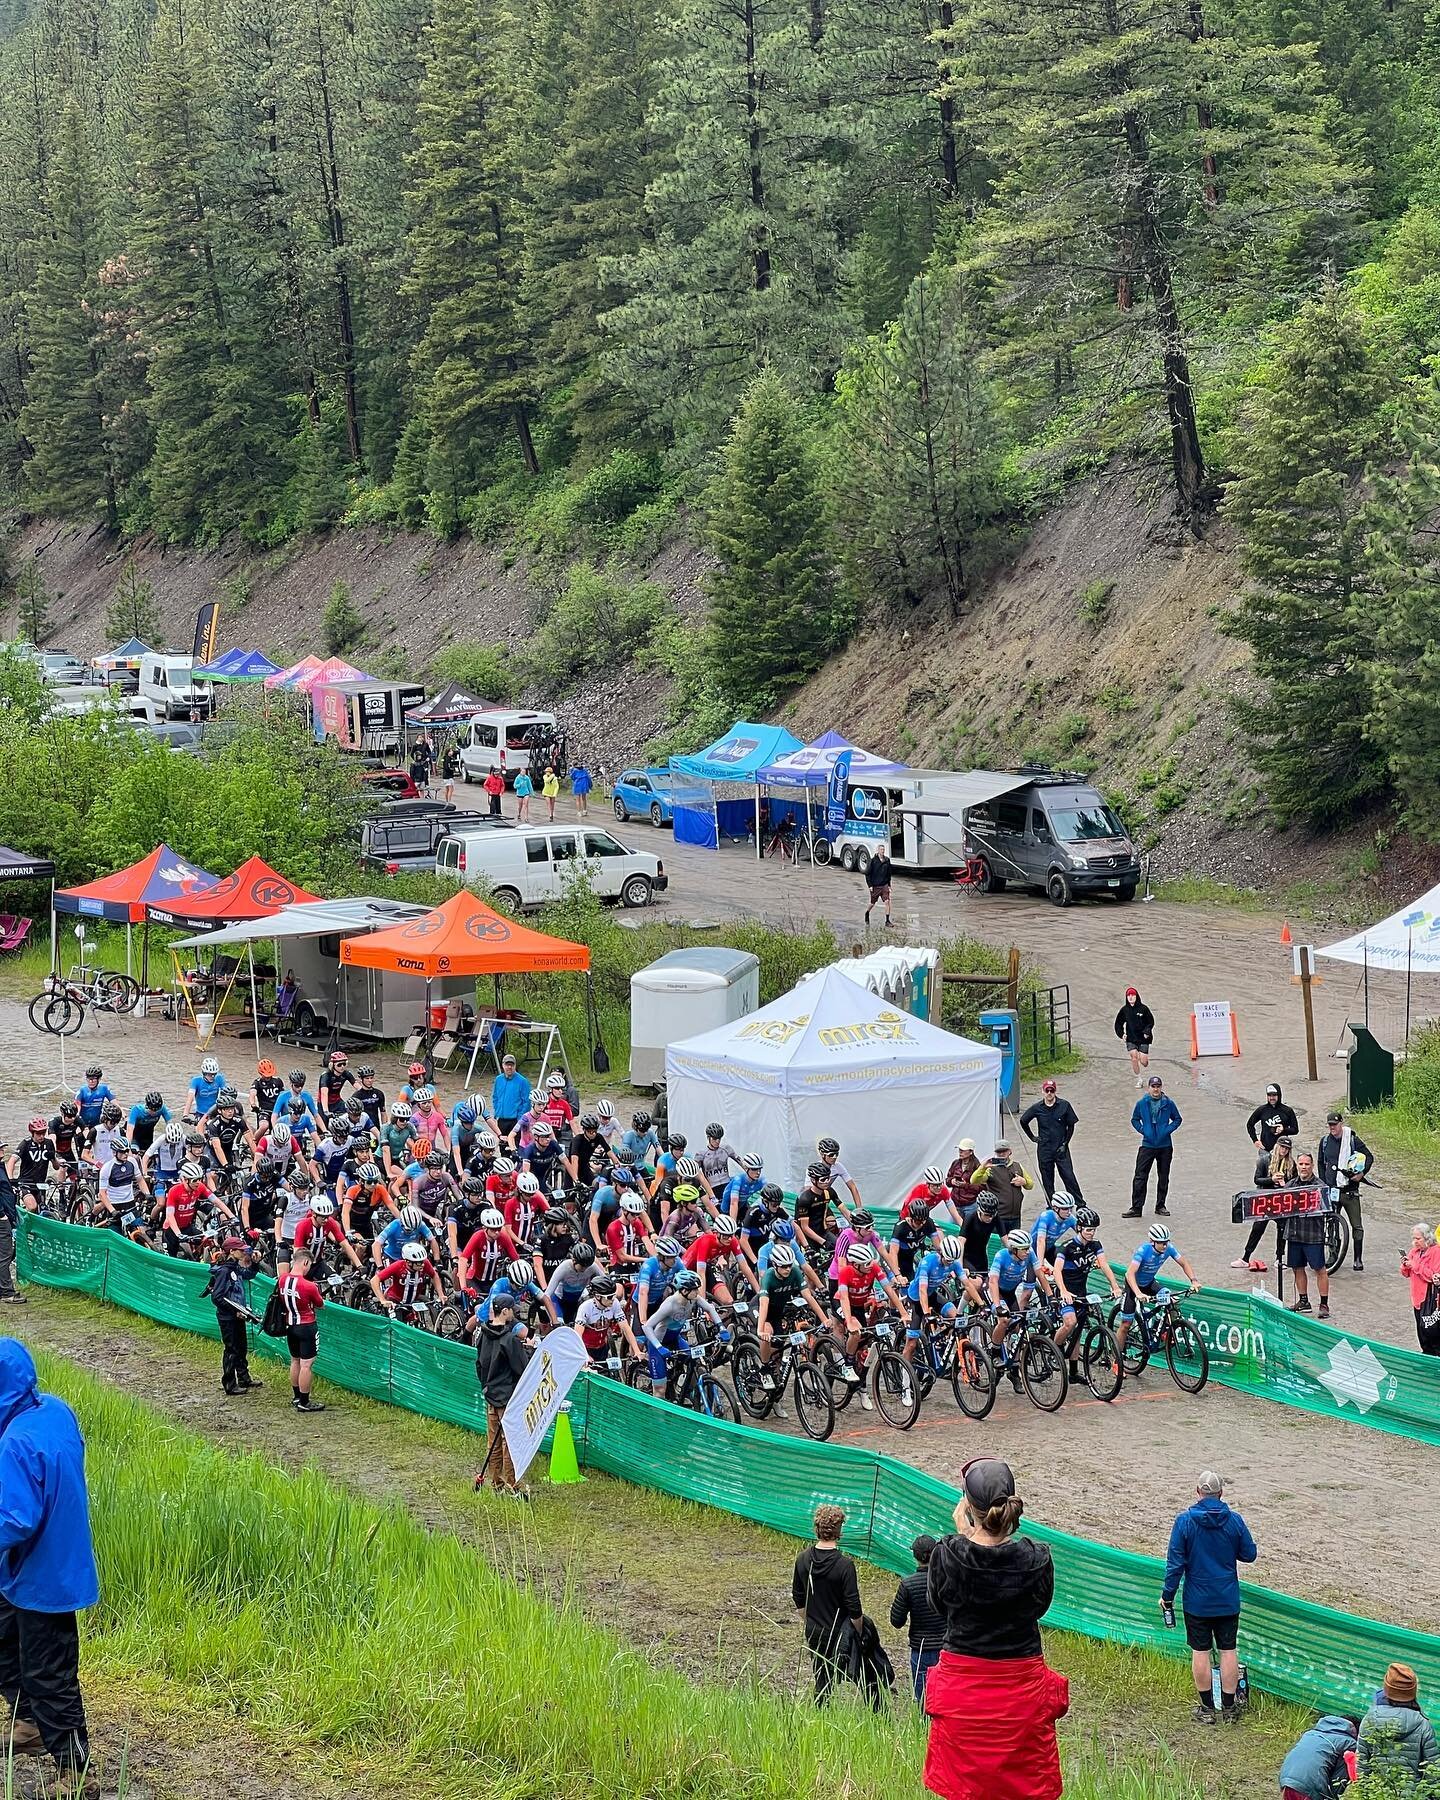 Last weekend our riders lined up for the junior UCI races at Missoula XC. The competition was fierce and the weather was so rainy! The team did amazing. We love seeing these young riders push themselves with some of the best youth in the country. 

?